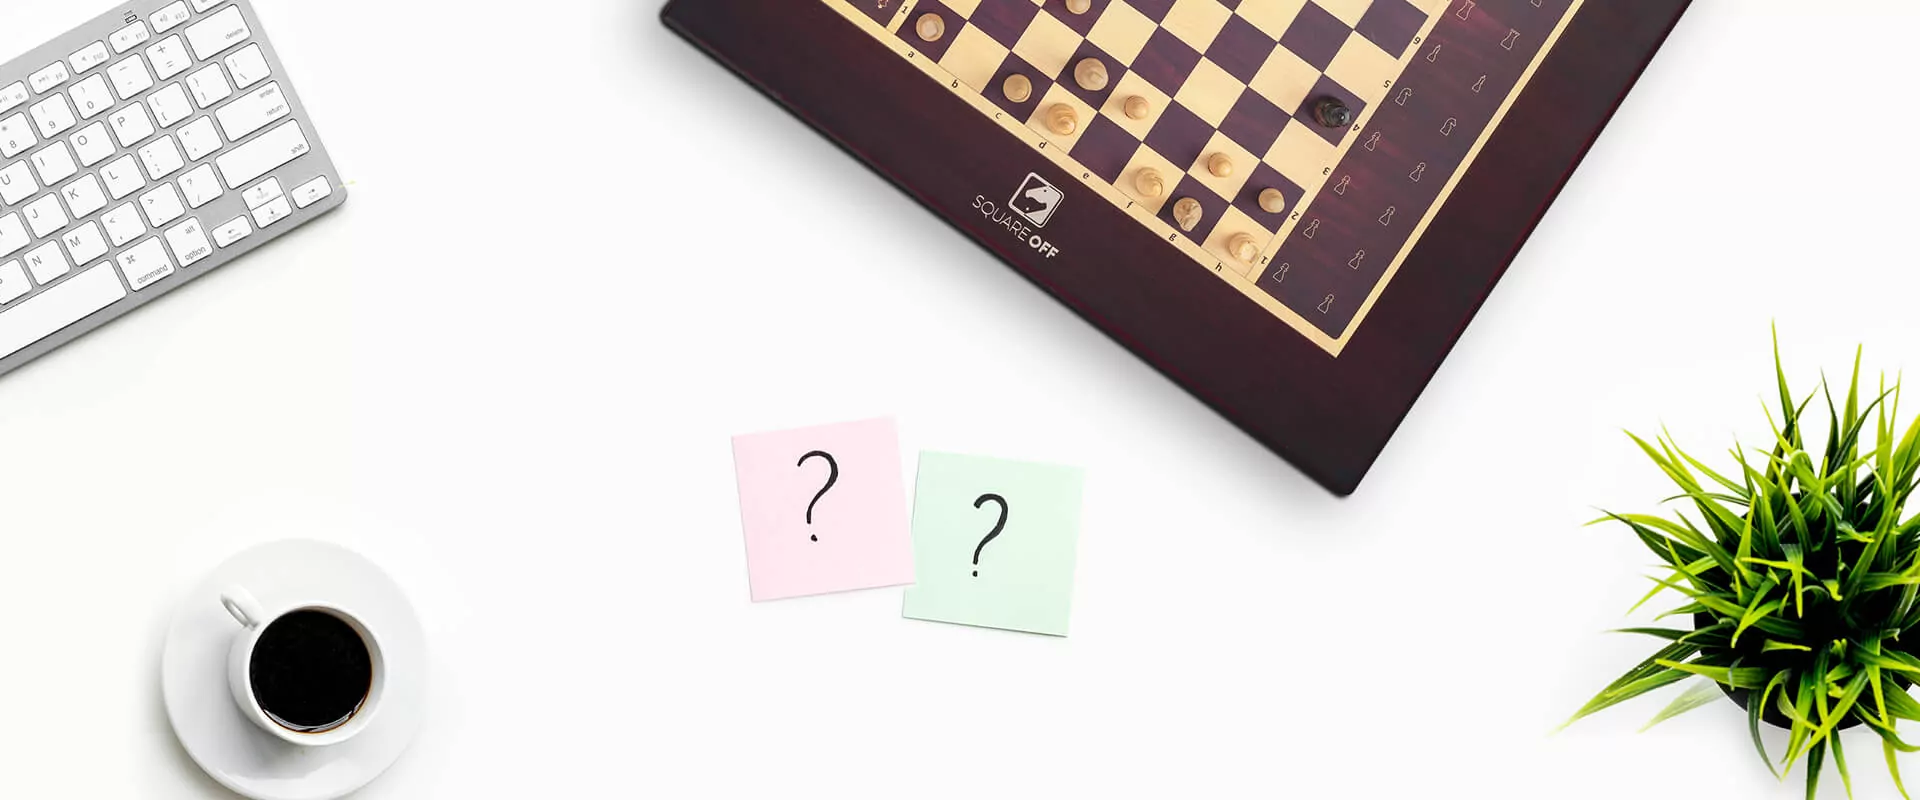 Can AnyBody Tell Me The Answer - Chess Forums 